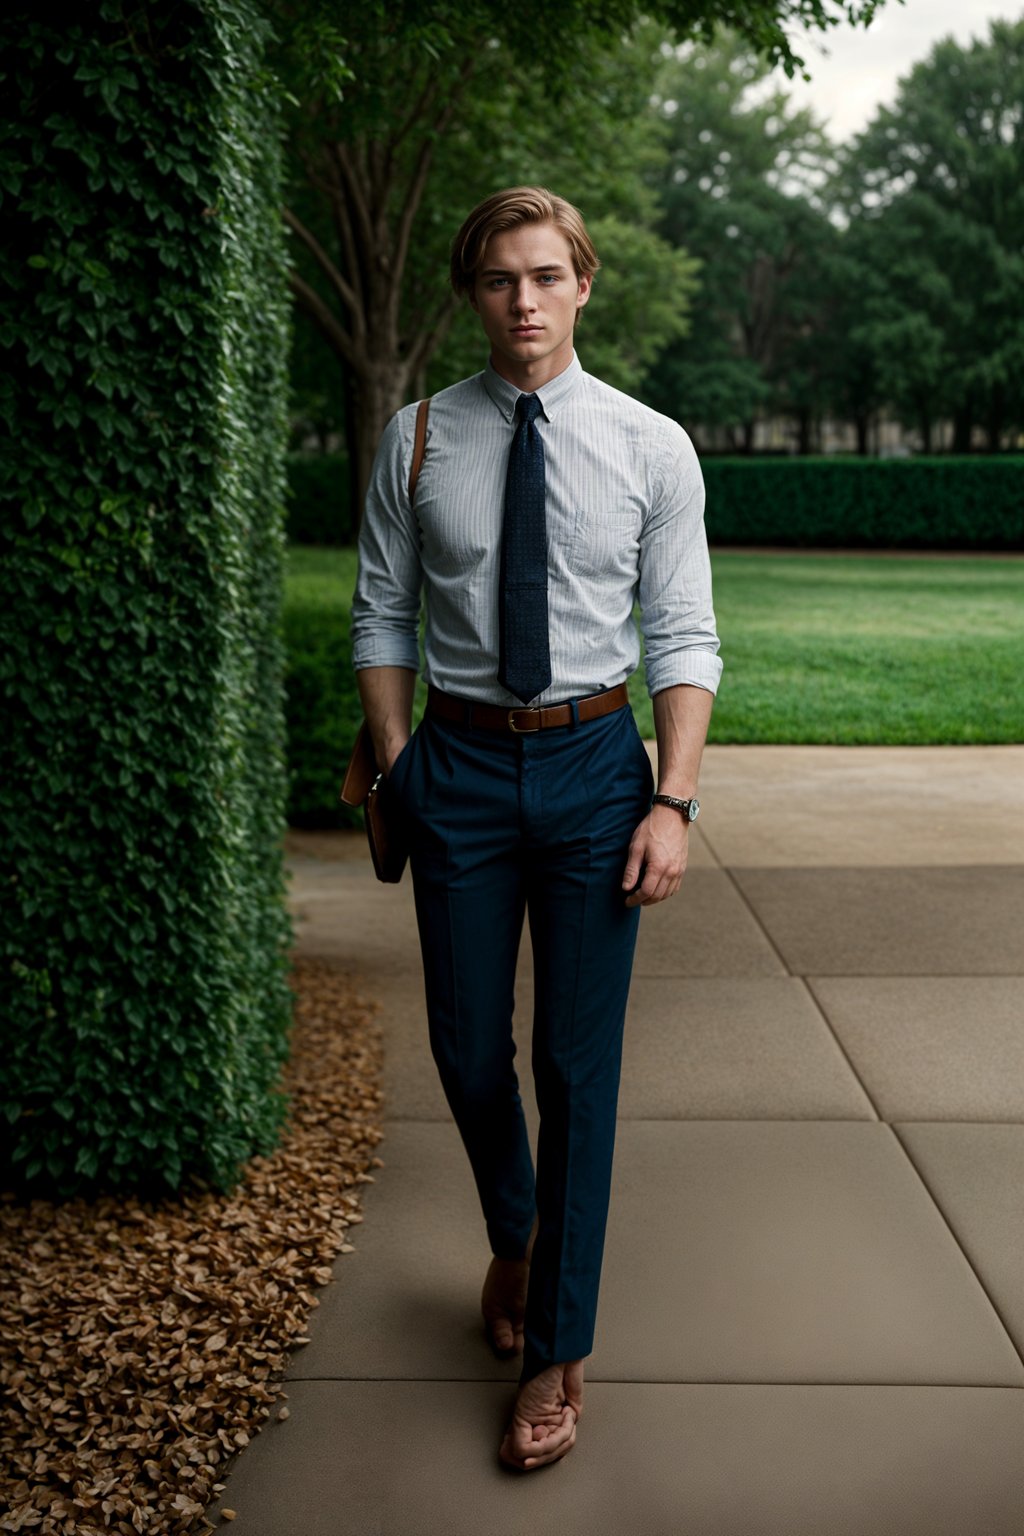 a man in preppy style, old money aesthetic, posh style, elite school stlye, luxurious style, gossip girl neo-prep style, ralph lauren style, country club style, ivy league style